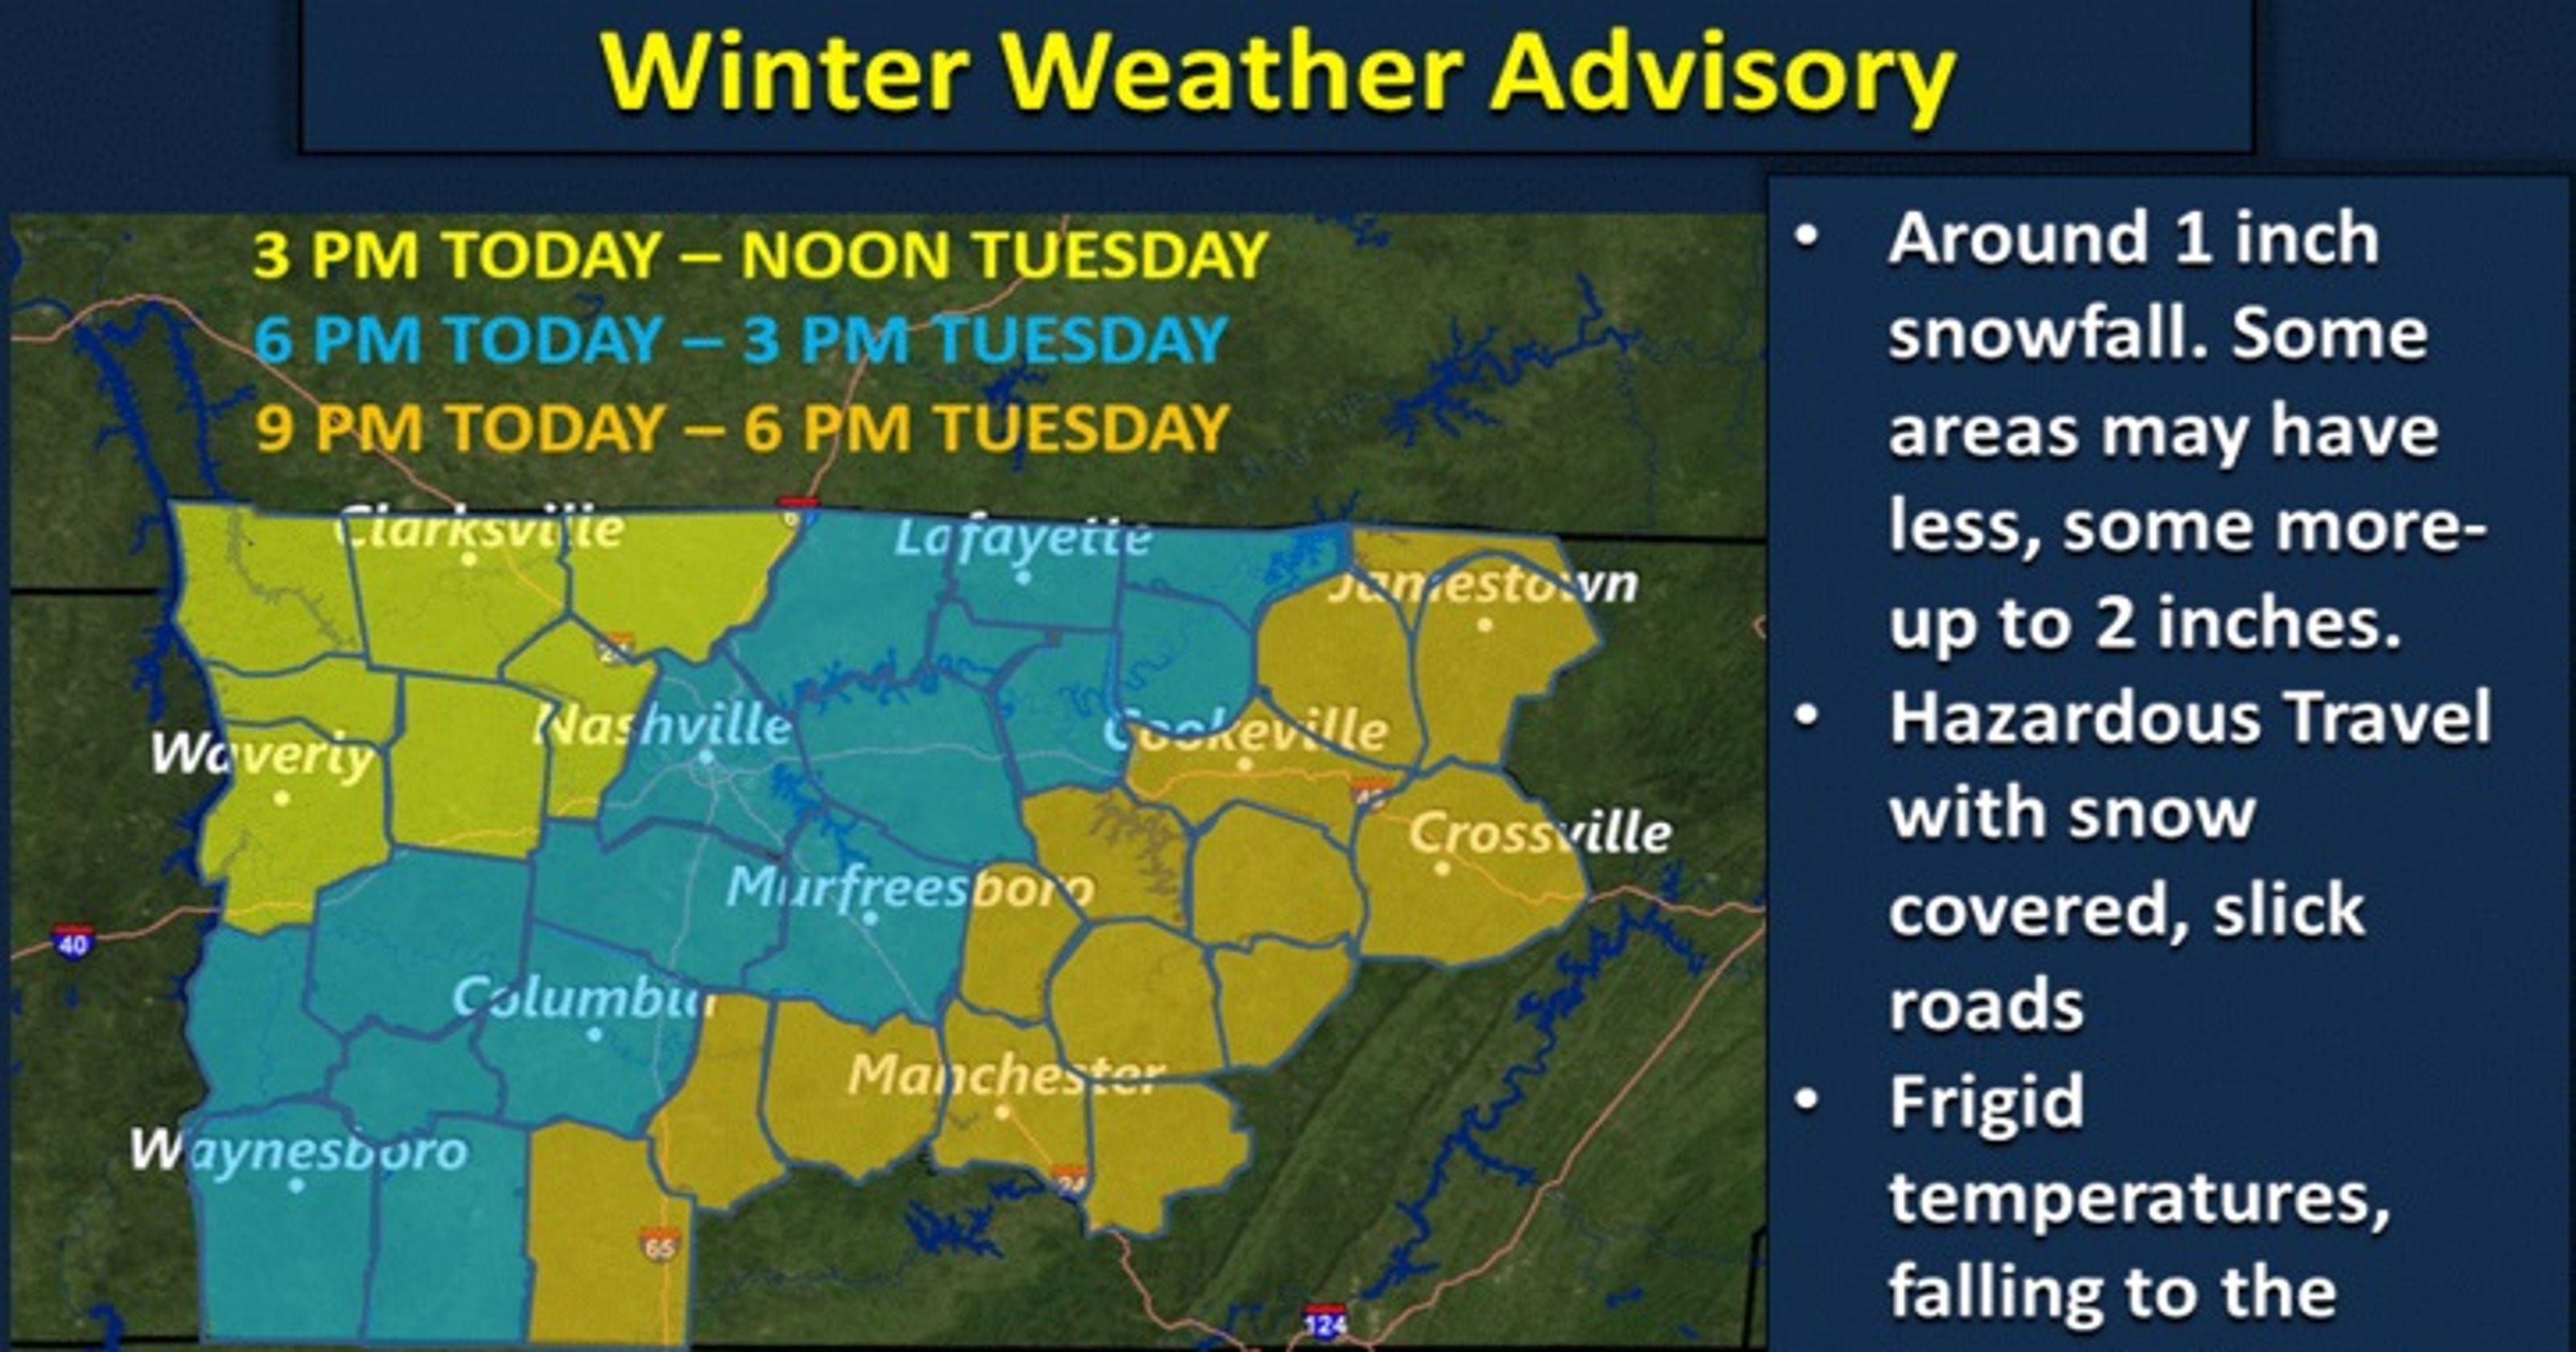 Clarksville weather School canceled Tuesday, second snow begins